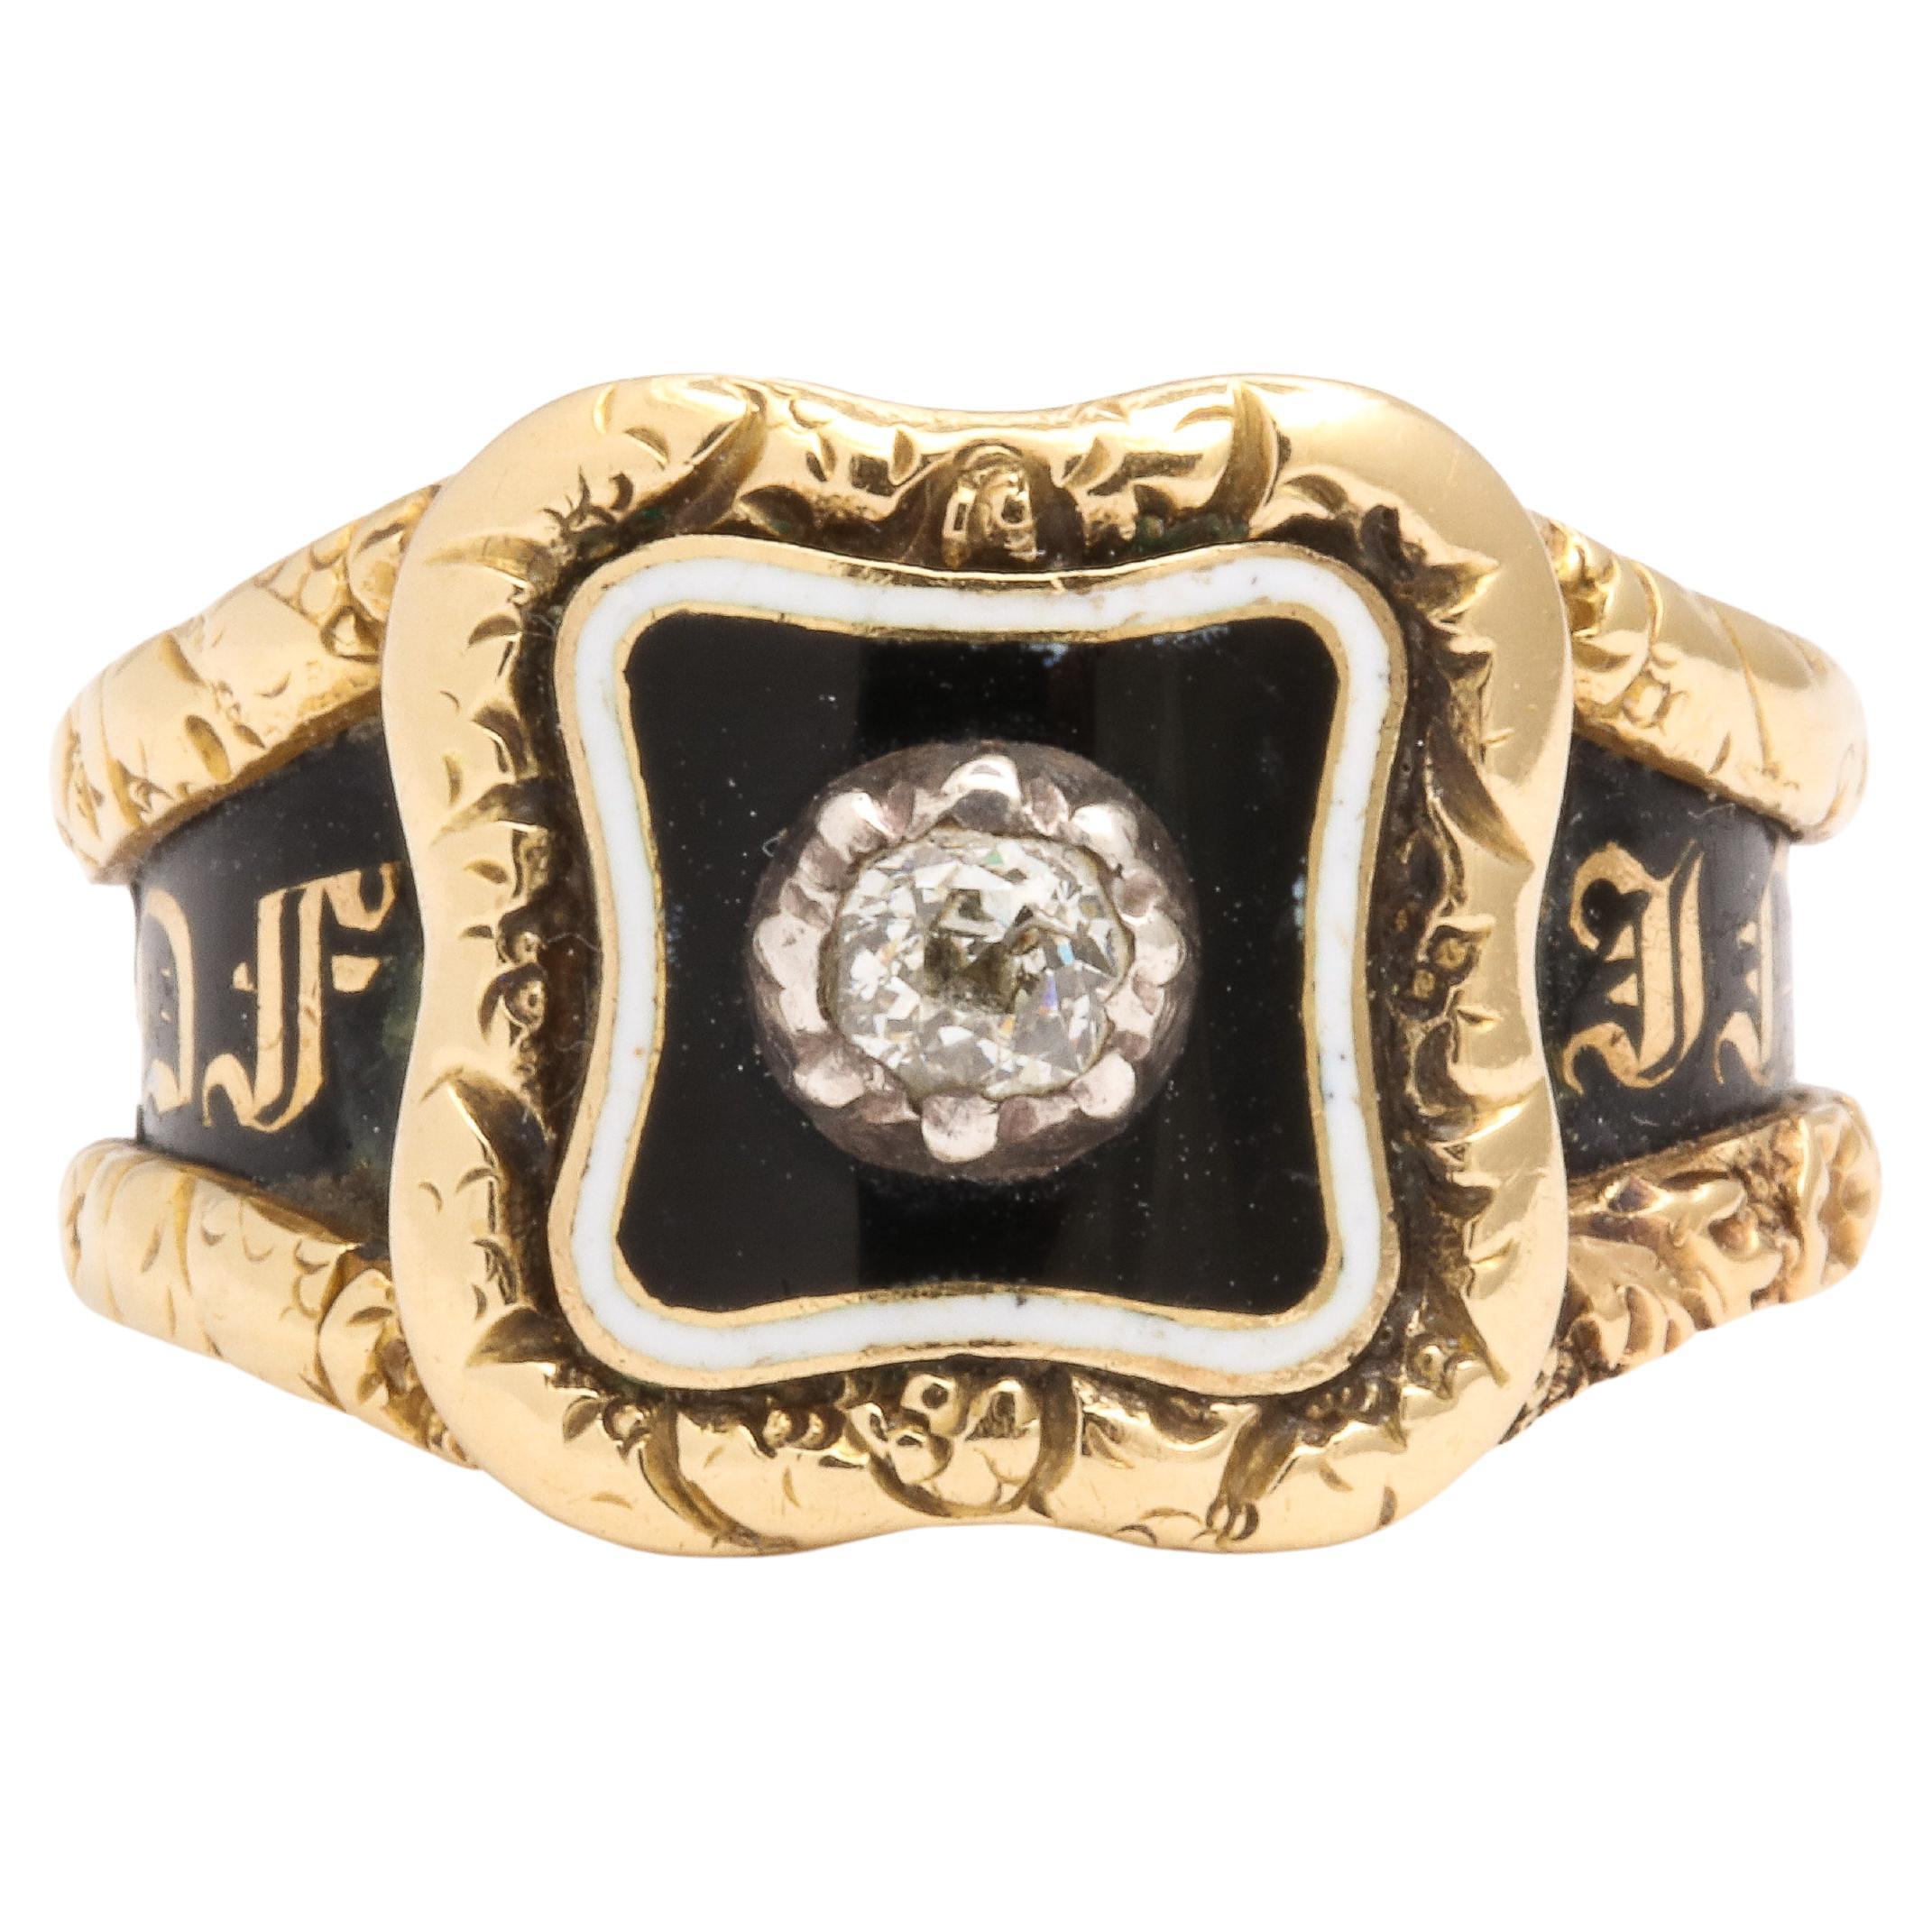 Georgian Memorial Ring with Enamel and Diamond in 18 Kt Gold